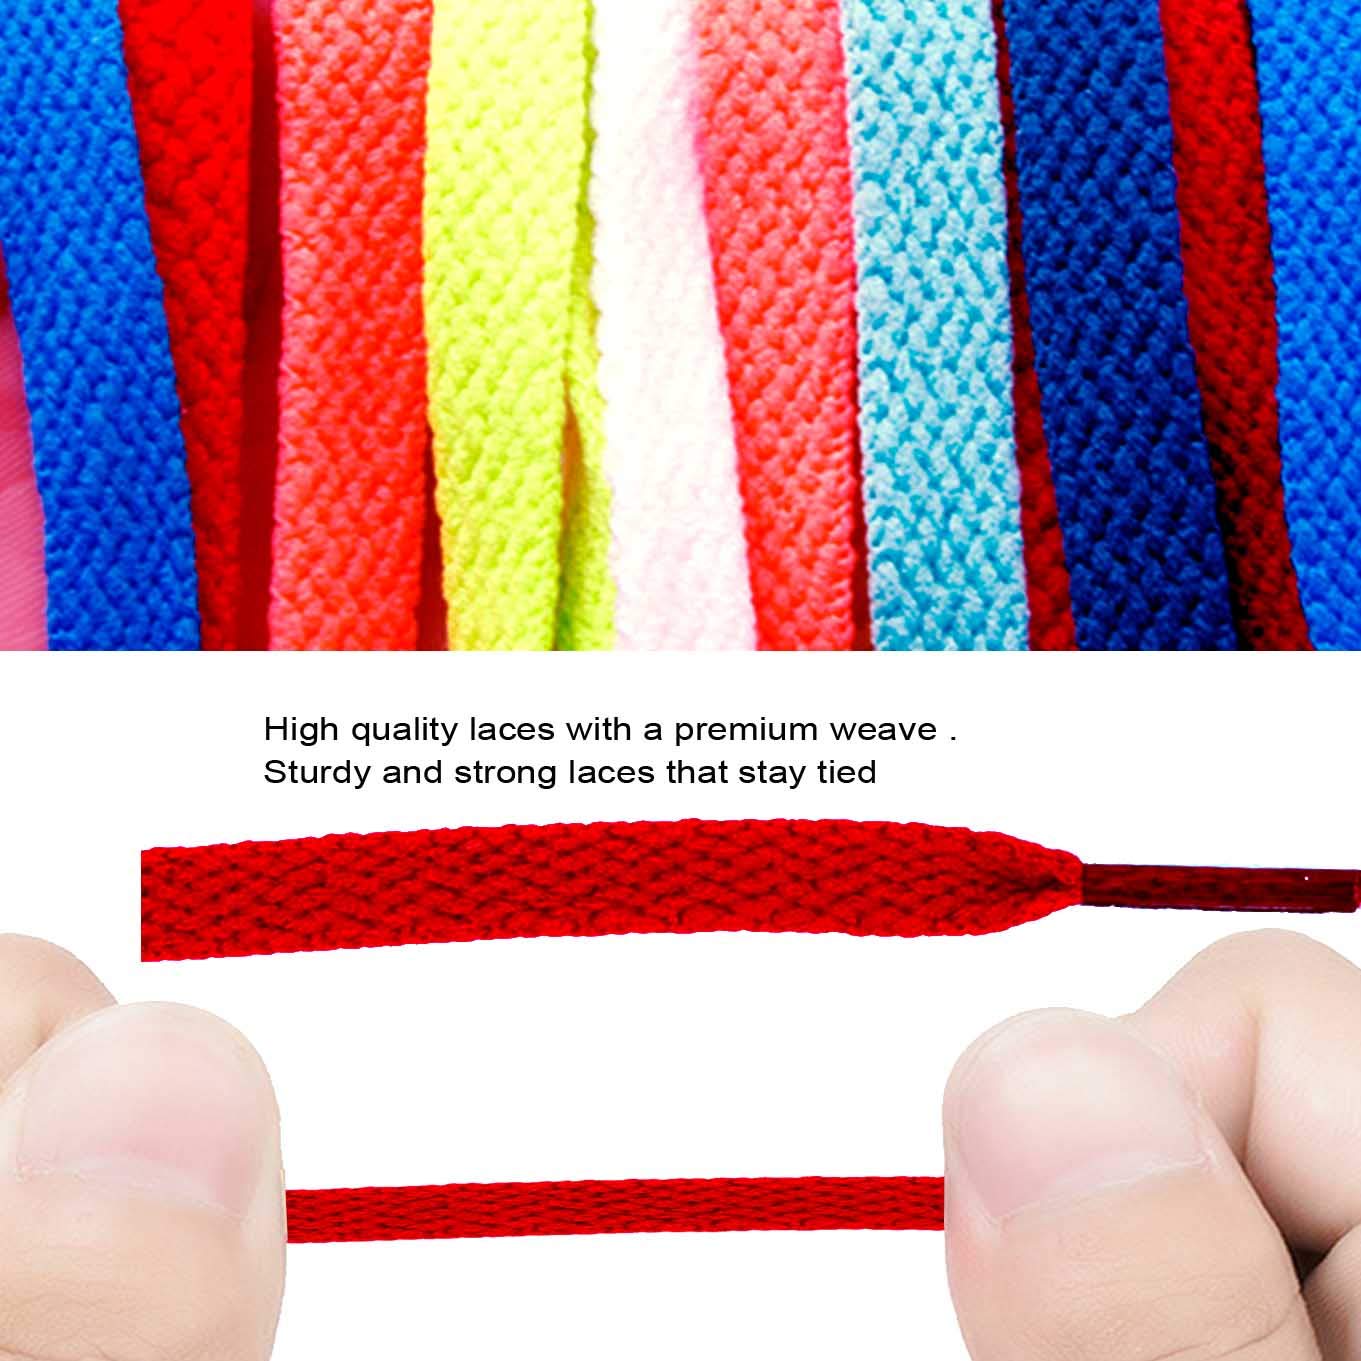 CaseHQ 3 Pair Flat Shoe laces 5/16" Wide Shoelaces for Athletic Tennis Running Sneakers